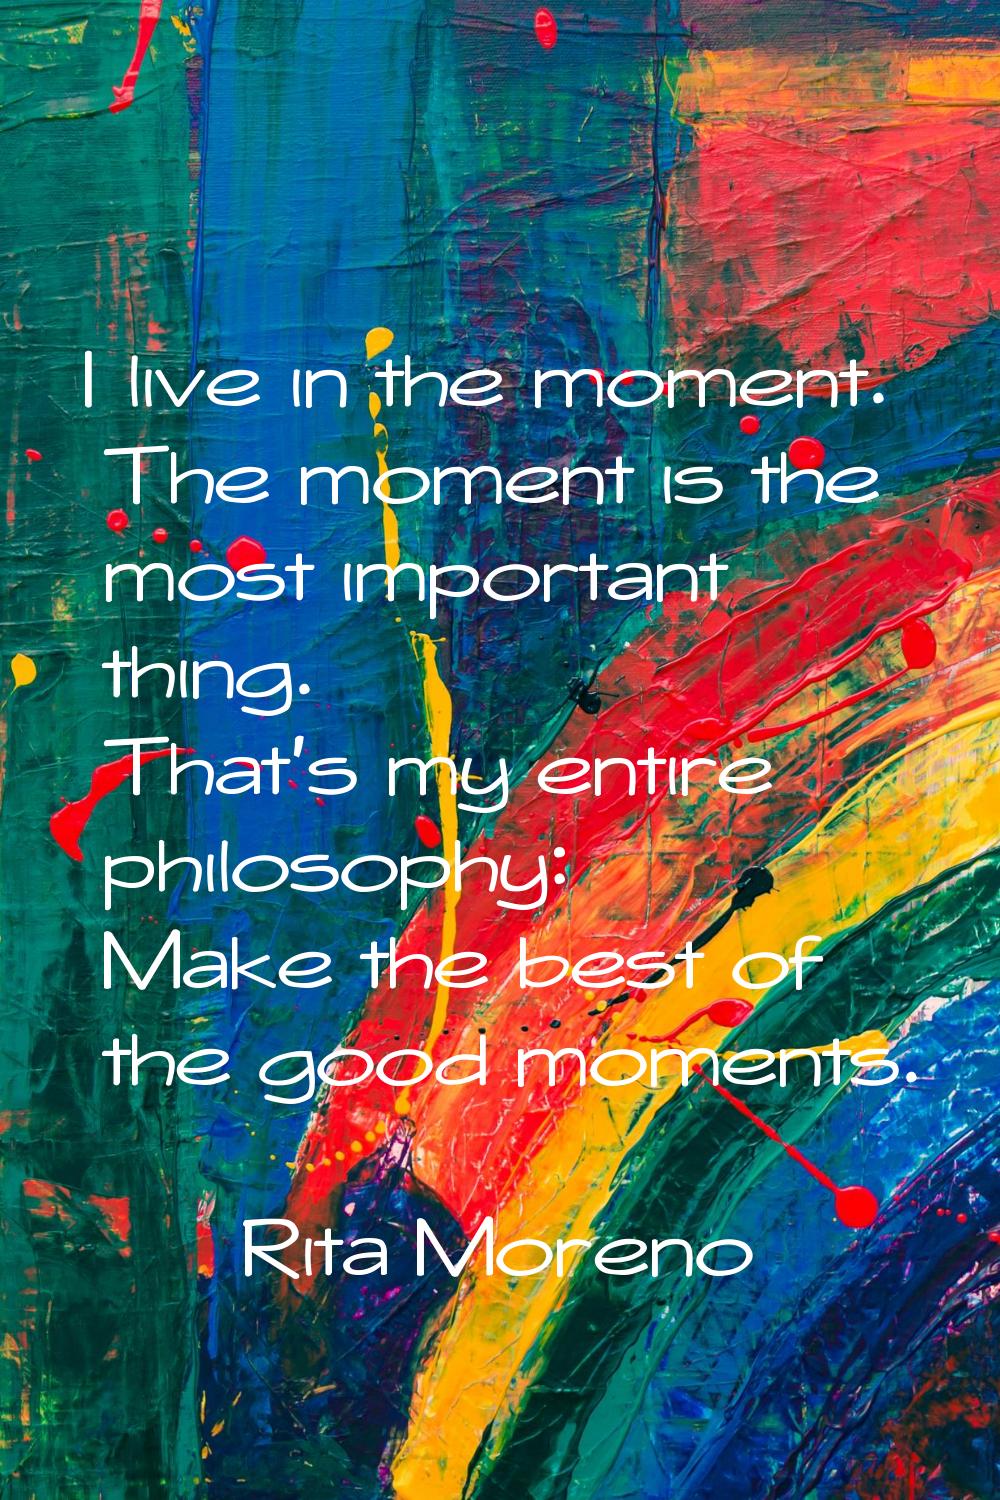 I live in the moment. The moment is the most important thing. That's my entire philosophy: Make the